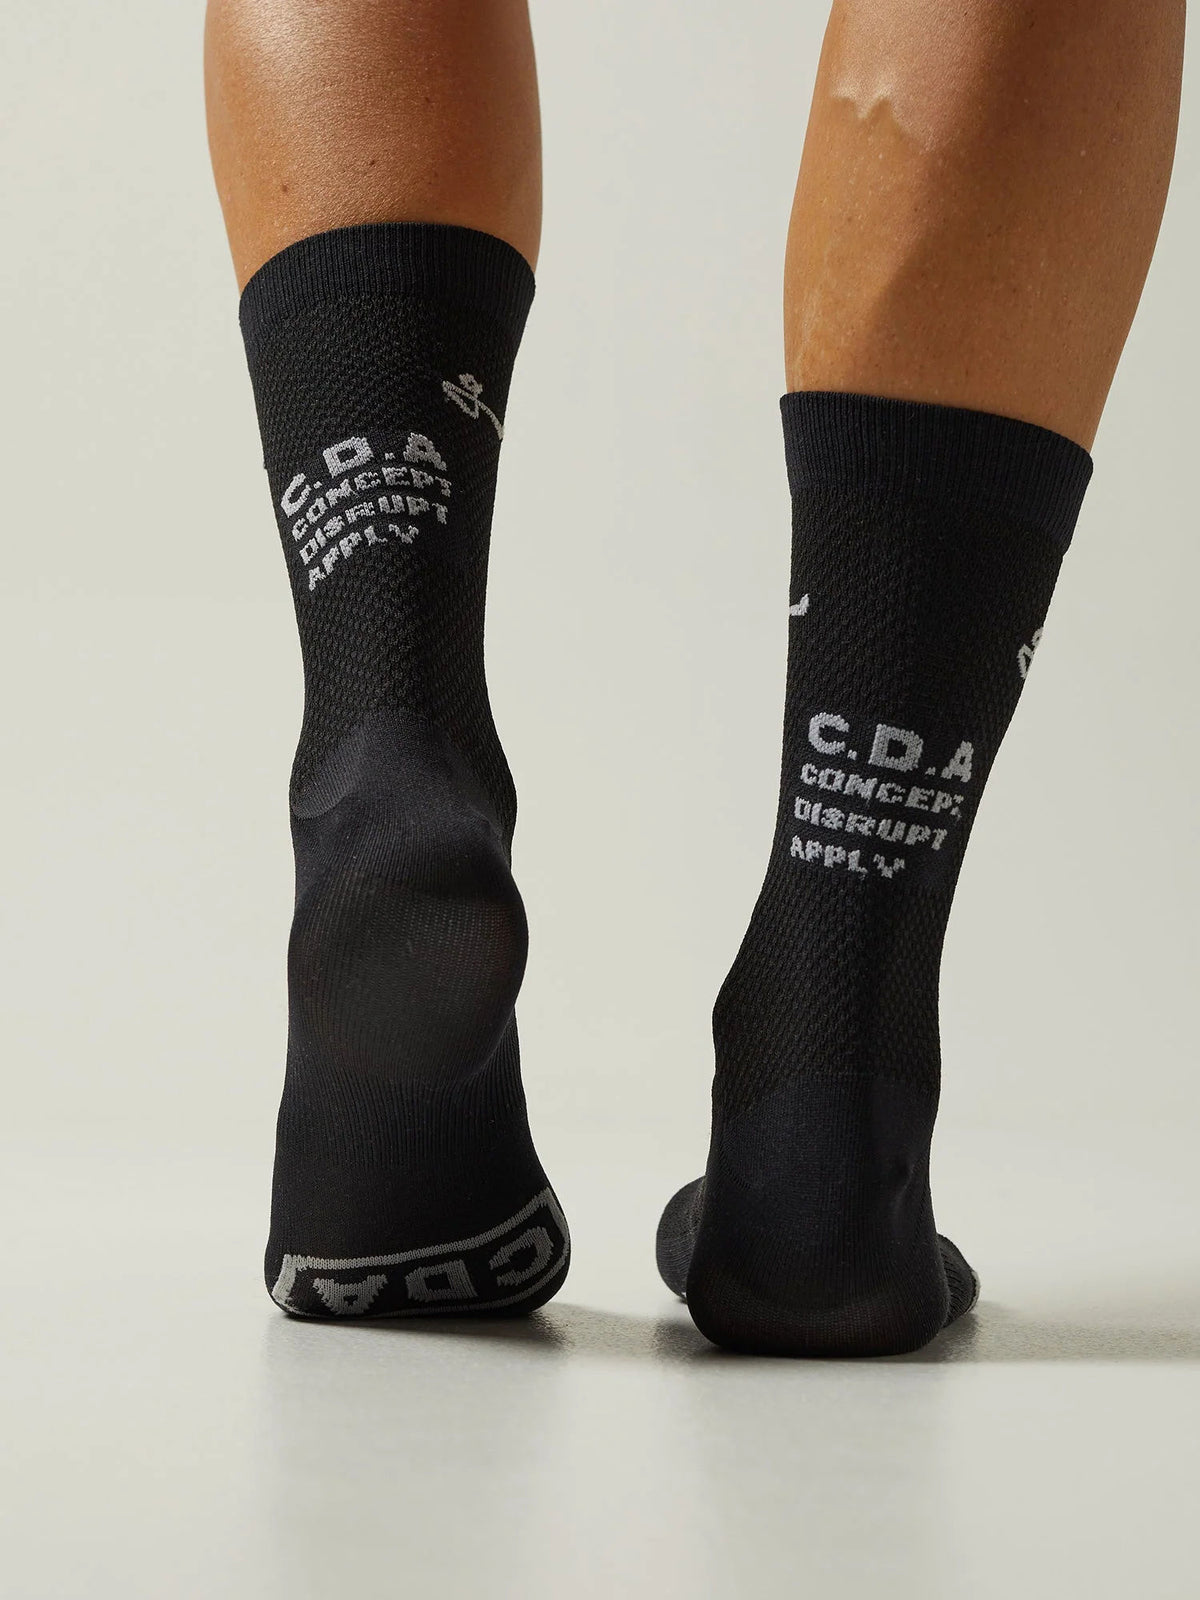 Givelo C.D.A Black サイクリング ソックス | GEARED